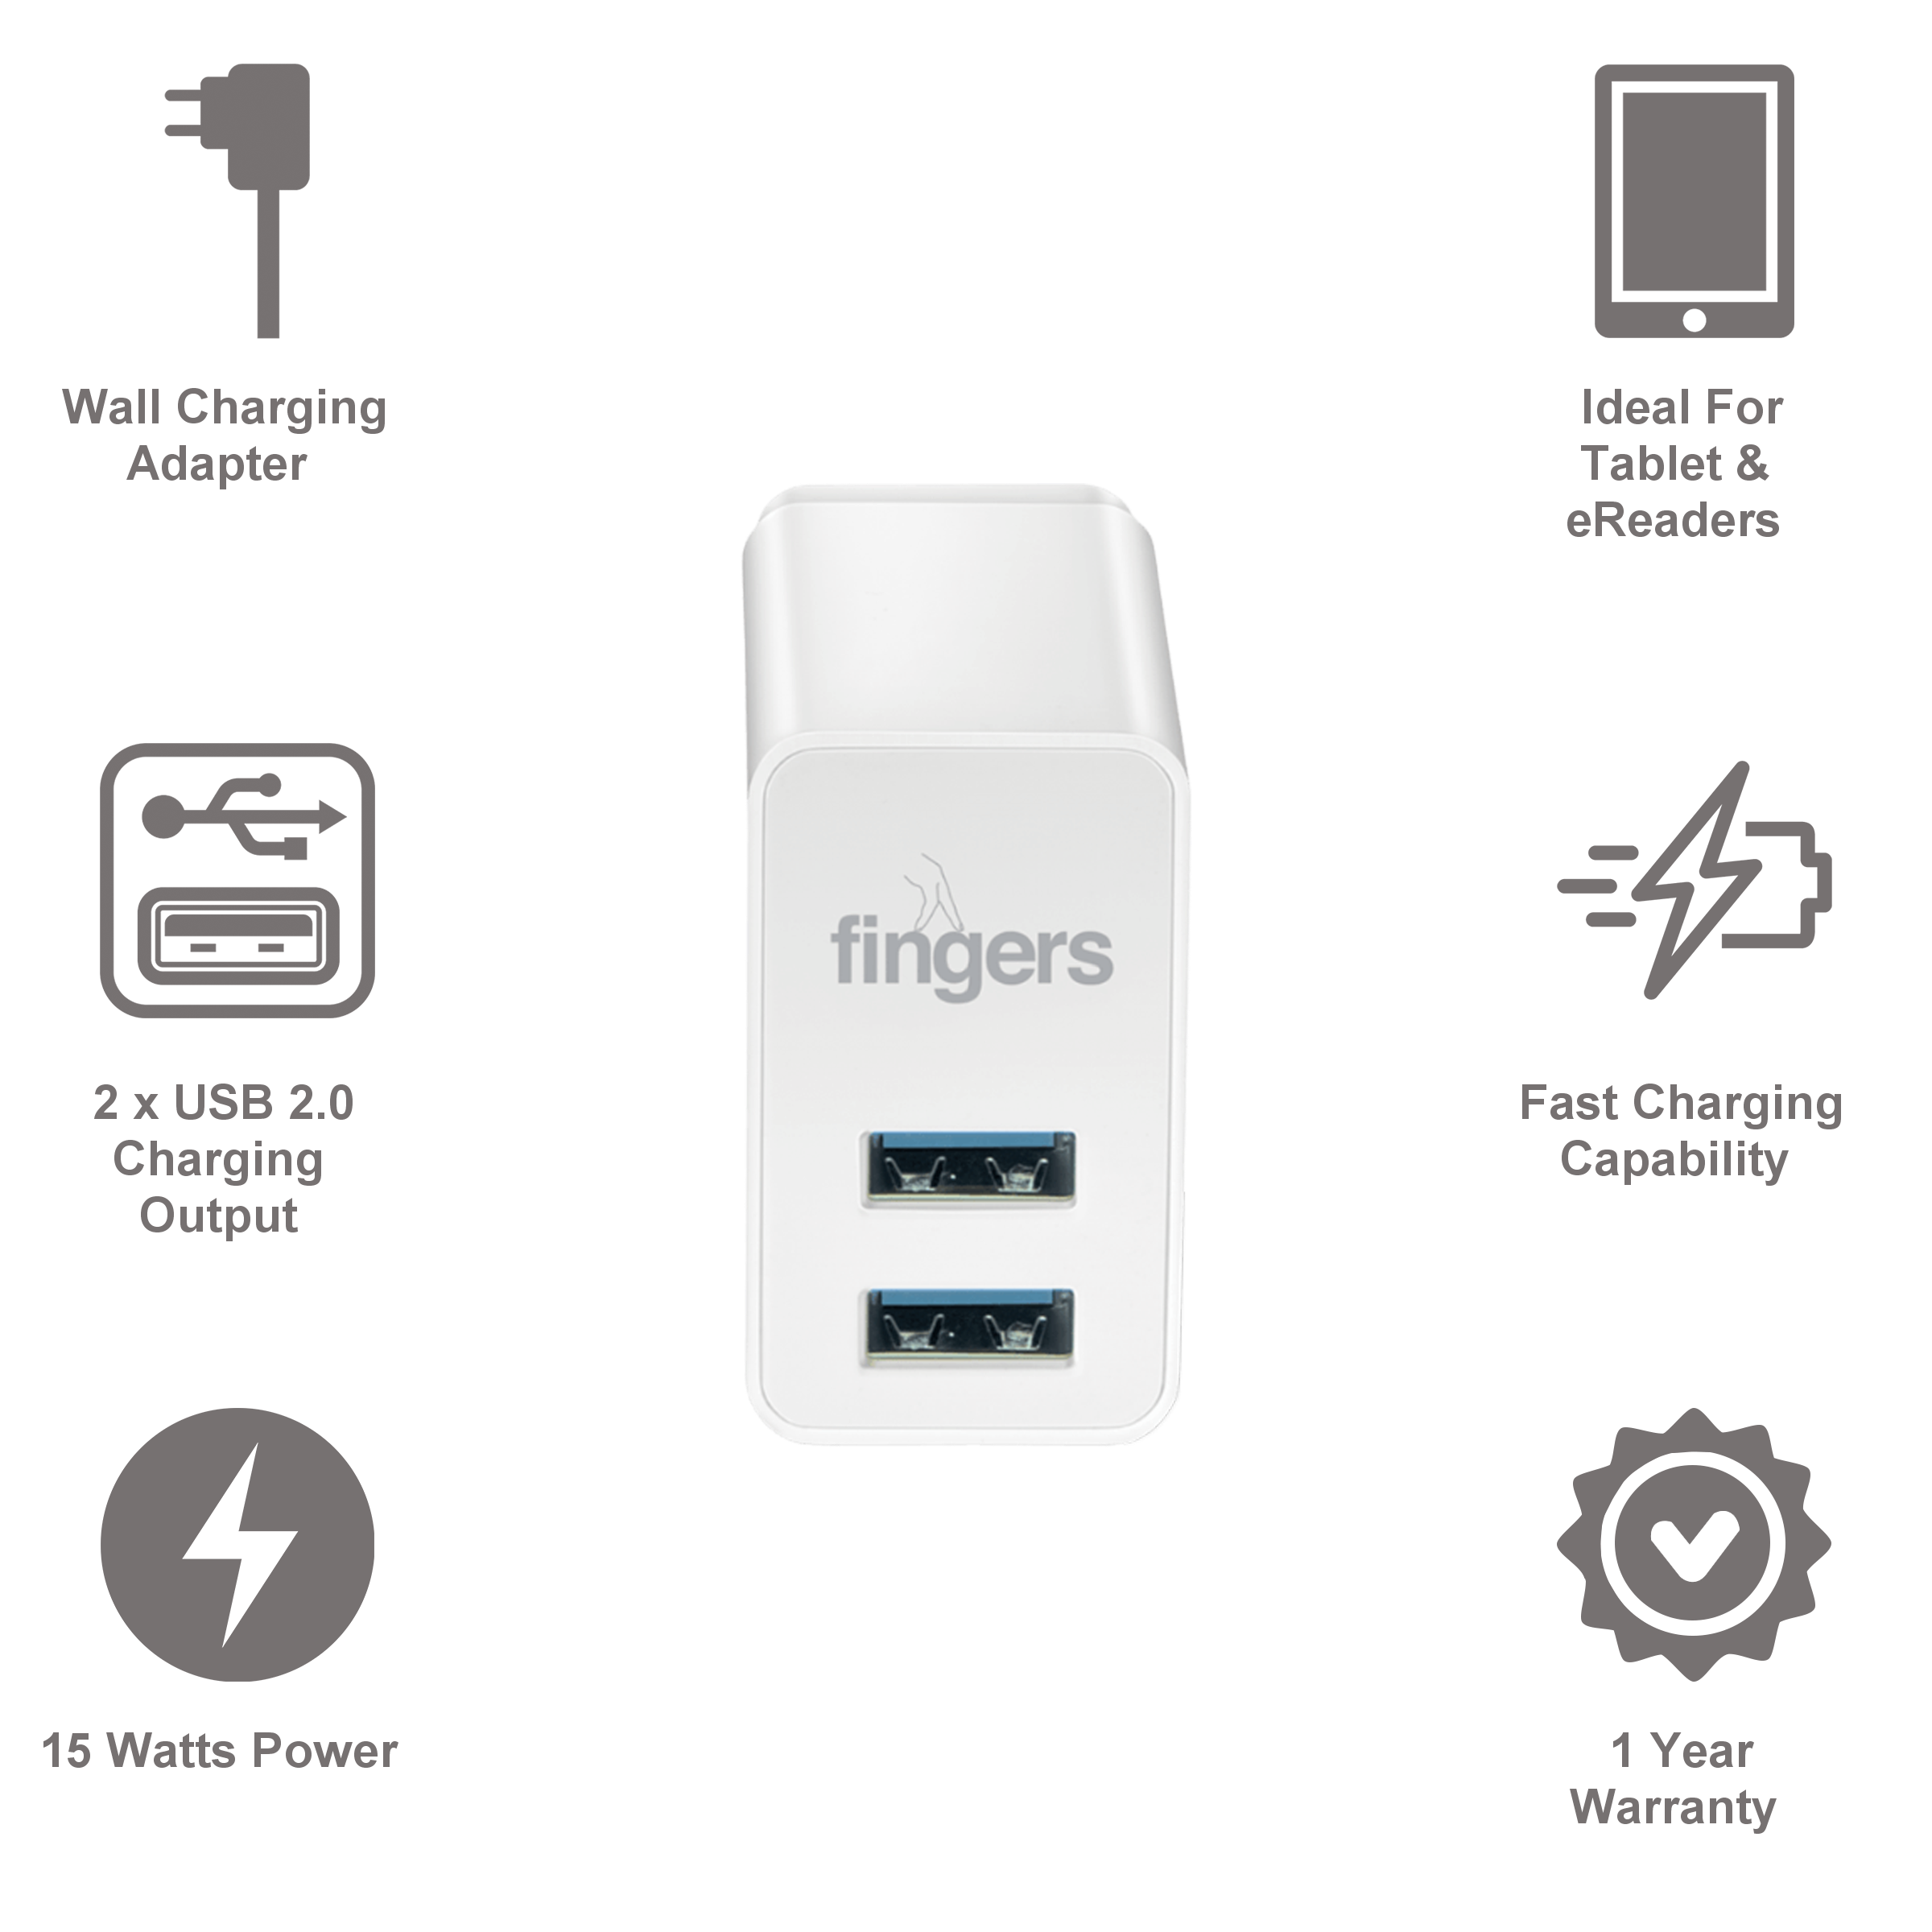 FINGERS 15 Watts/3 Amps 2-Port USB 2.0 Wall Charging Adapter (Fast Charging, PA0503A, Piano White)_3